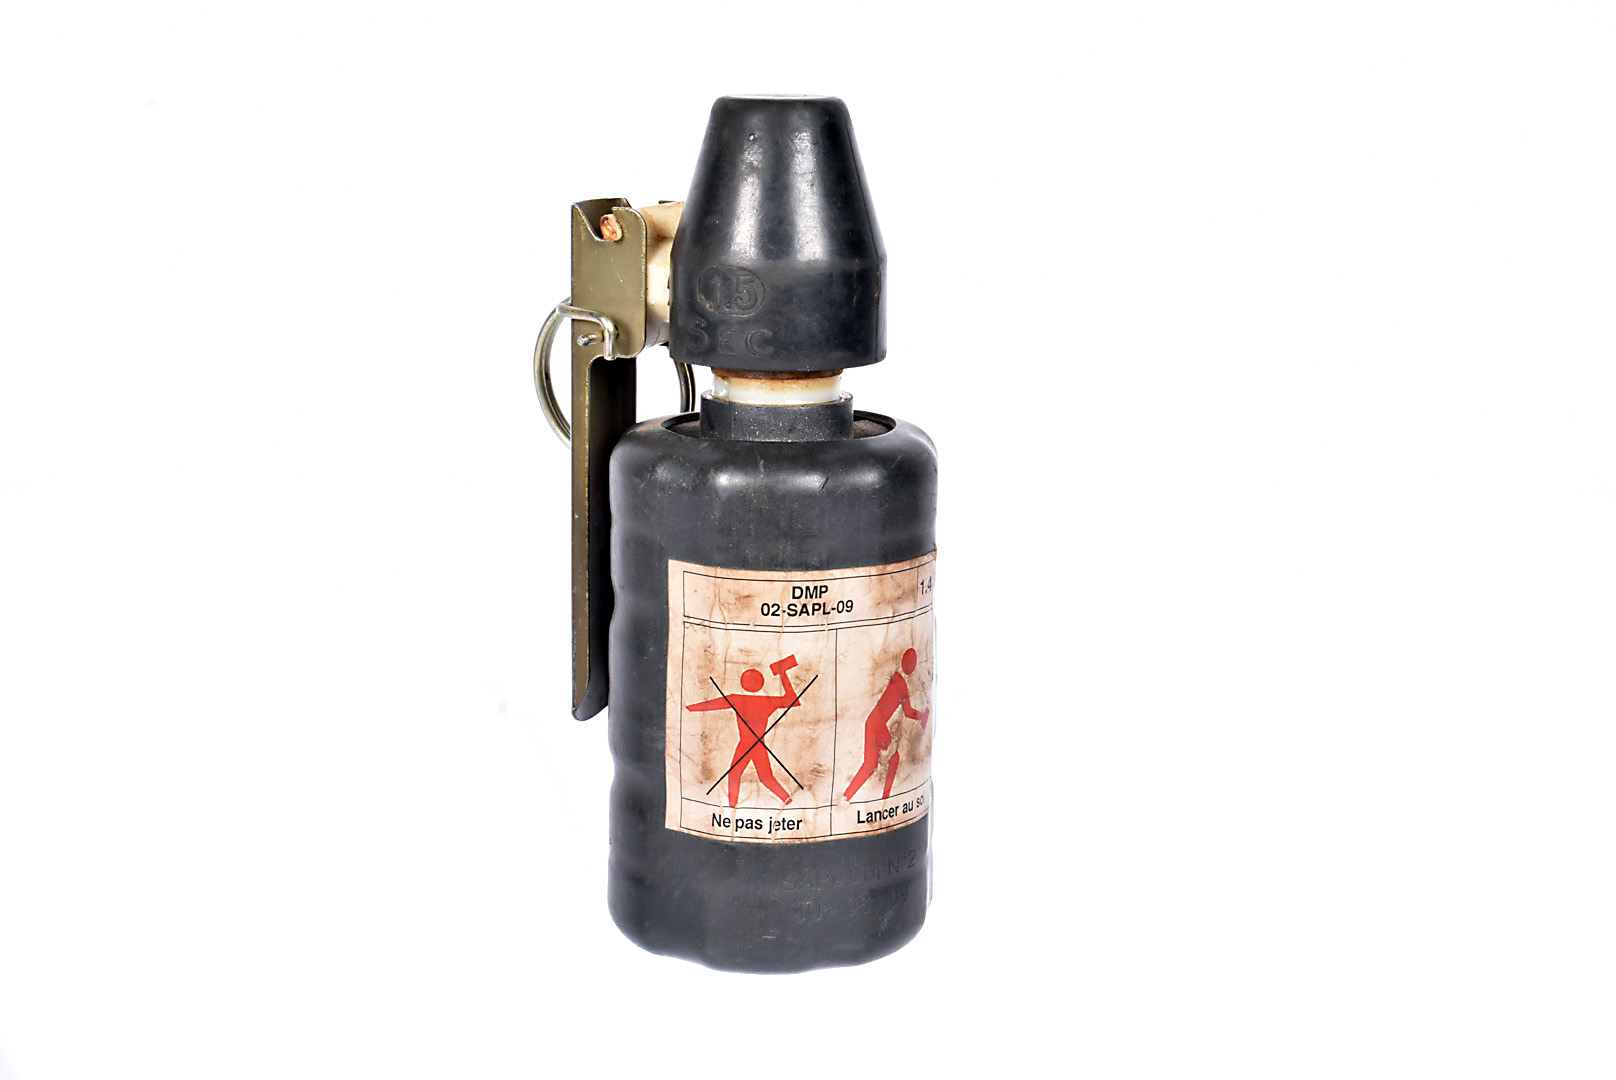 An inert French Anti-Riot grenade, marked SAPL Lot N JU-06-09 to the black rubber body, this holding